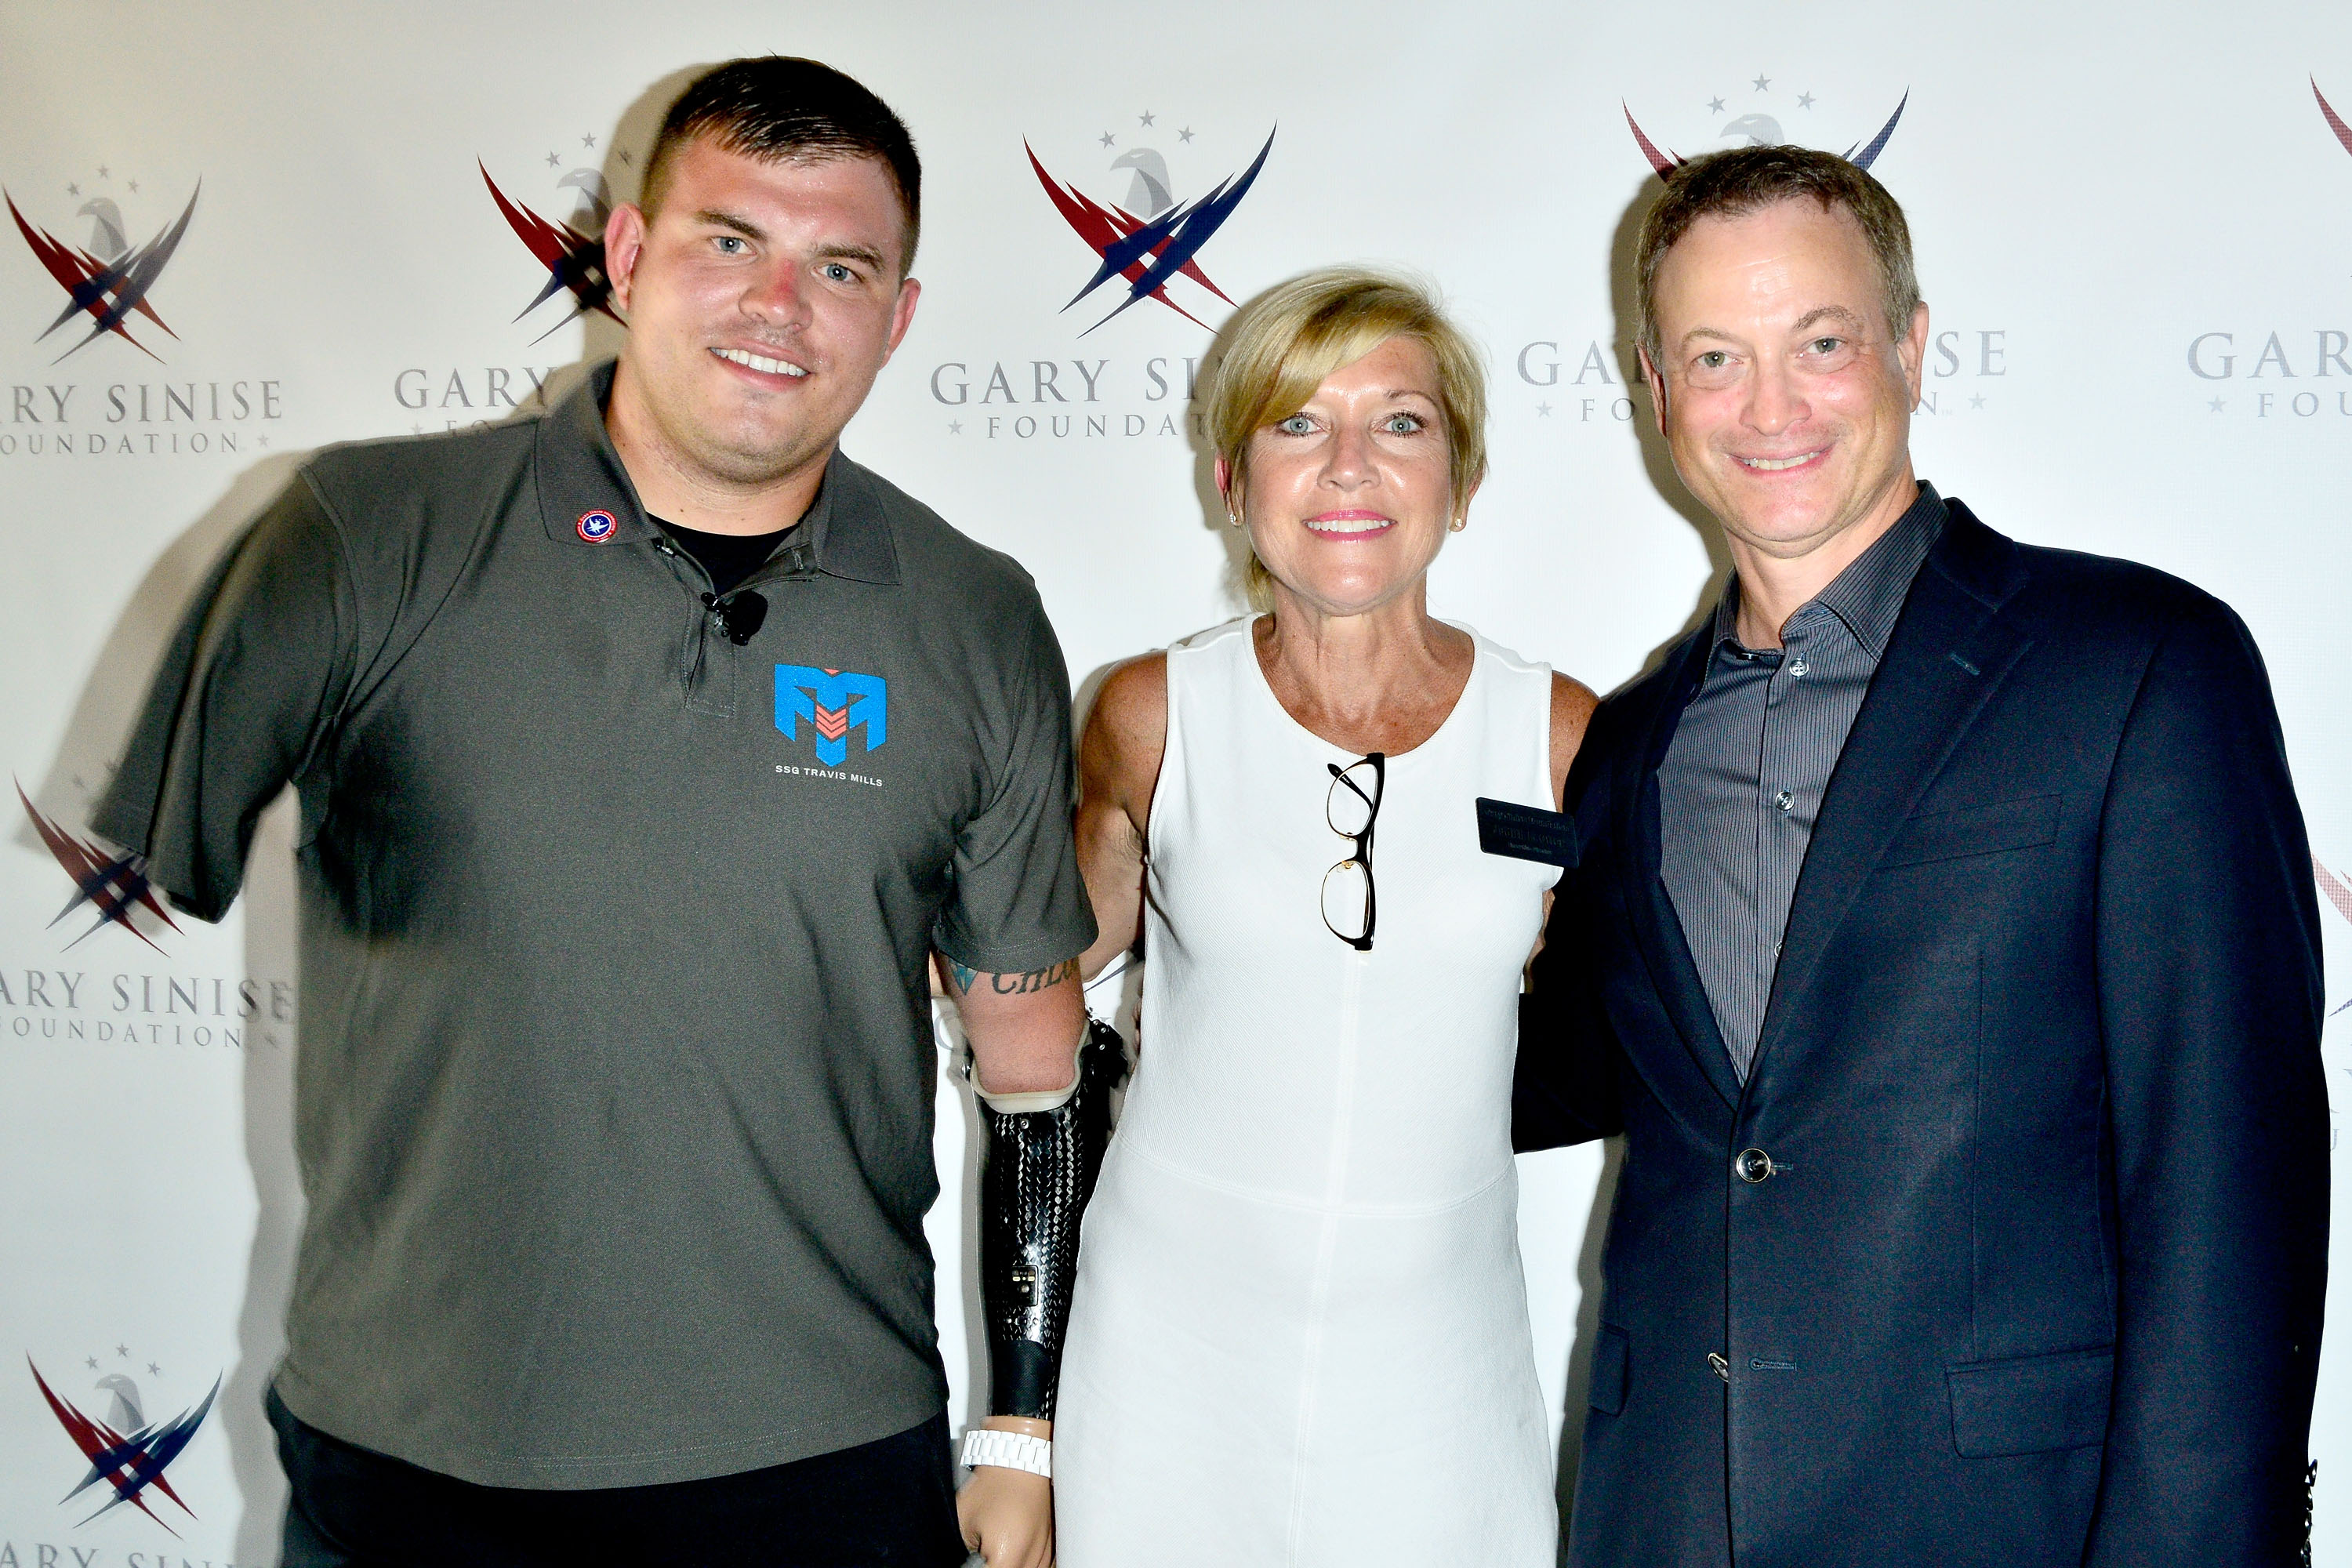 Travis Mills, Executive Director of the Gary Sinise Foundation Judy Otter, and Gary Sinise attend 'Travis: A Soldier's Story' benefit screening in Coronado, California, on July 8, 2014. | Source: Getty Images